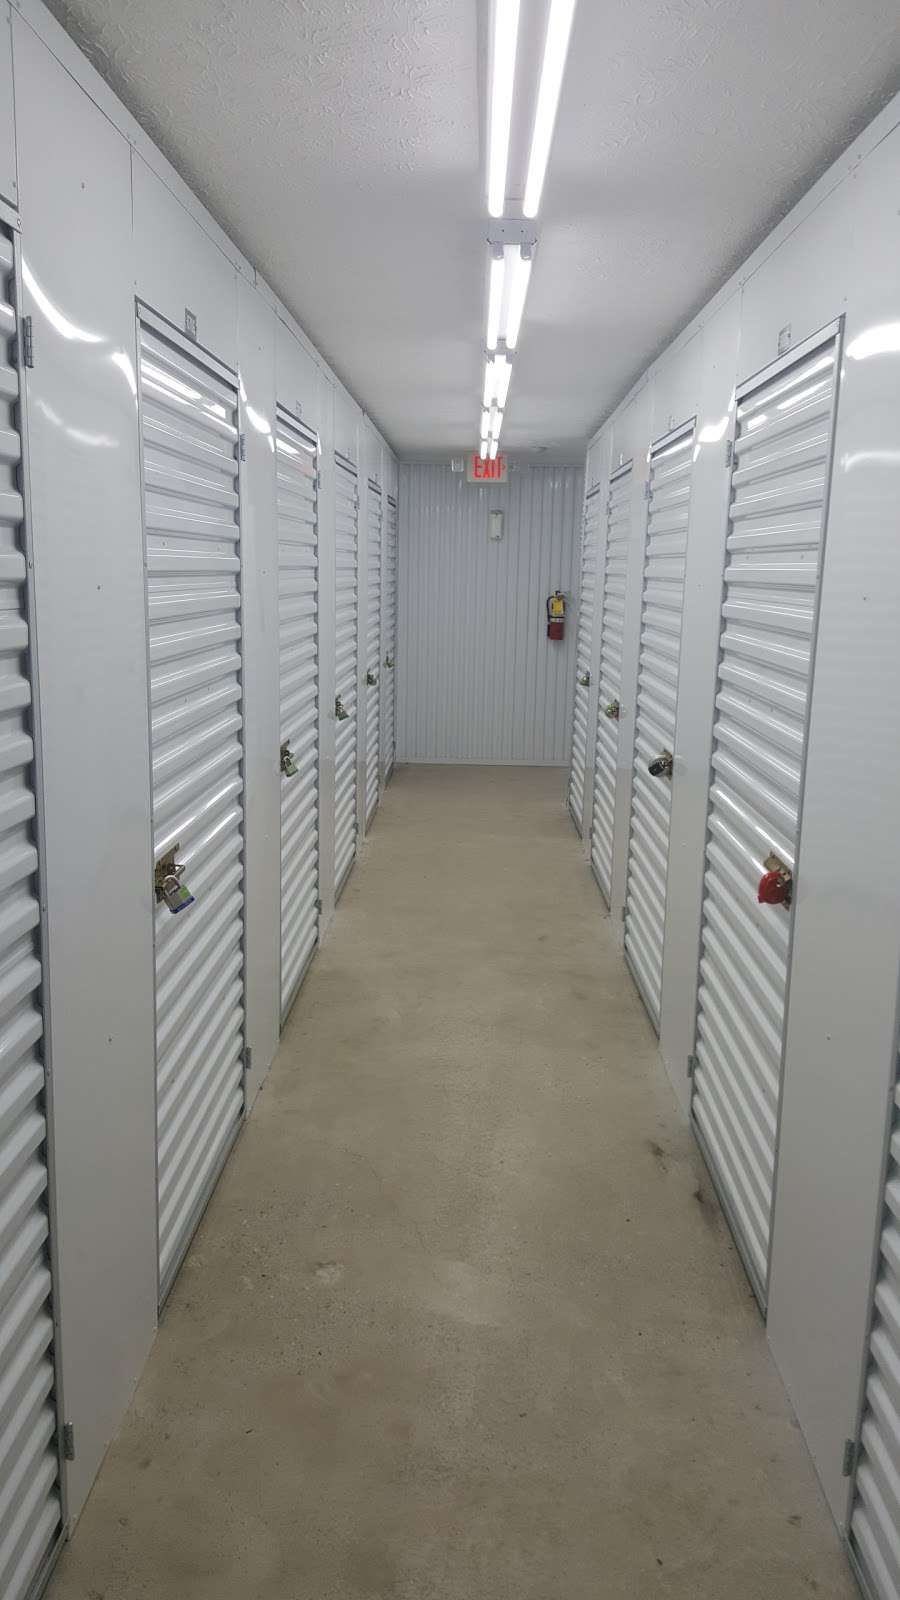 Extra Space Storage | 8051 Windham Lake Dr, Indianapolis, IN 46214, USA | Phone: (317) 293-2000